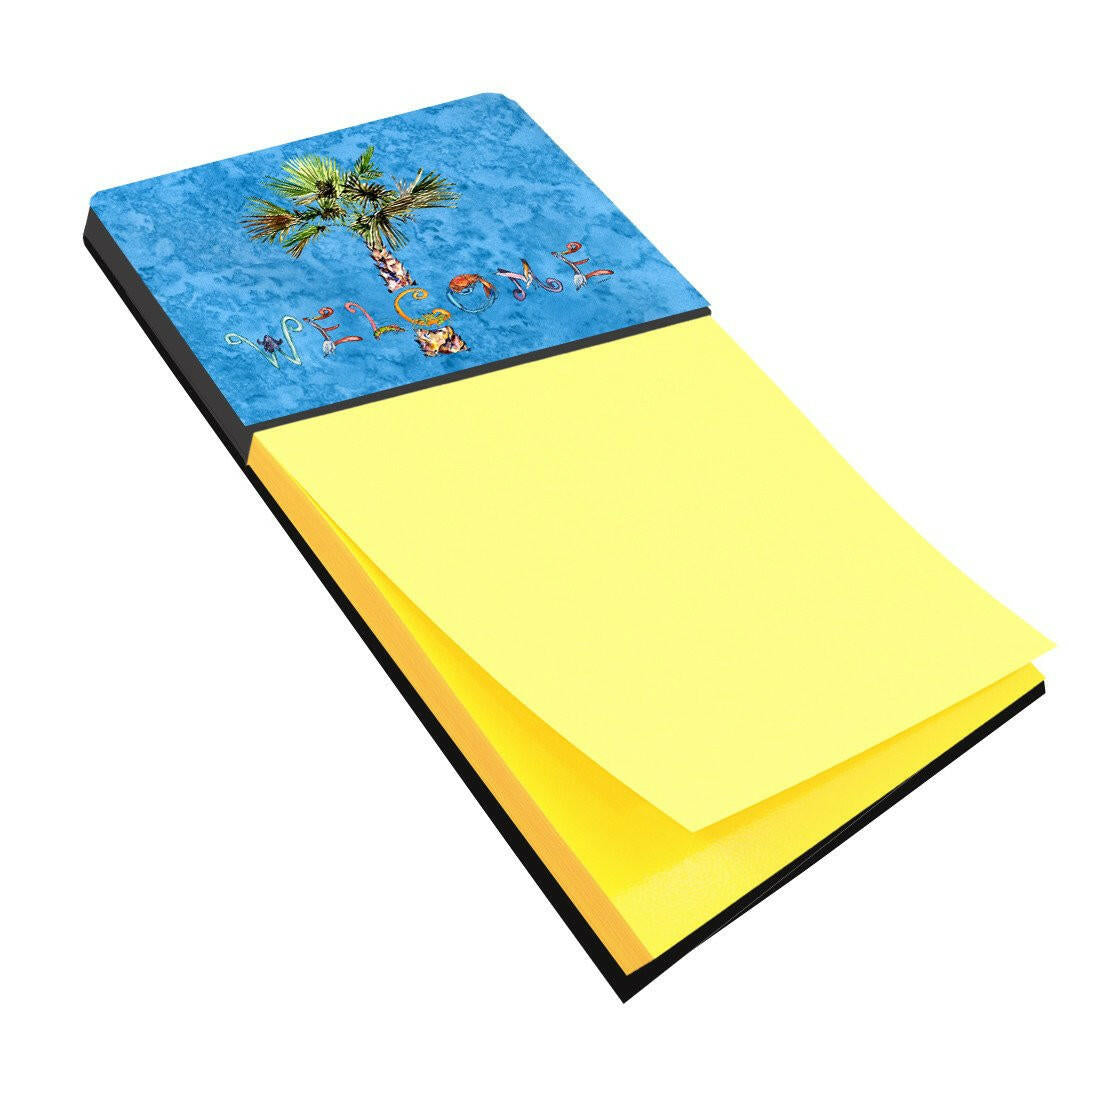 Welcome Palm Tree on Blue Sticky Note Holder 8708SN by Caroline's Treasures